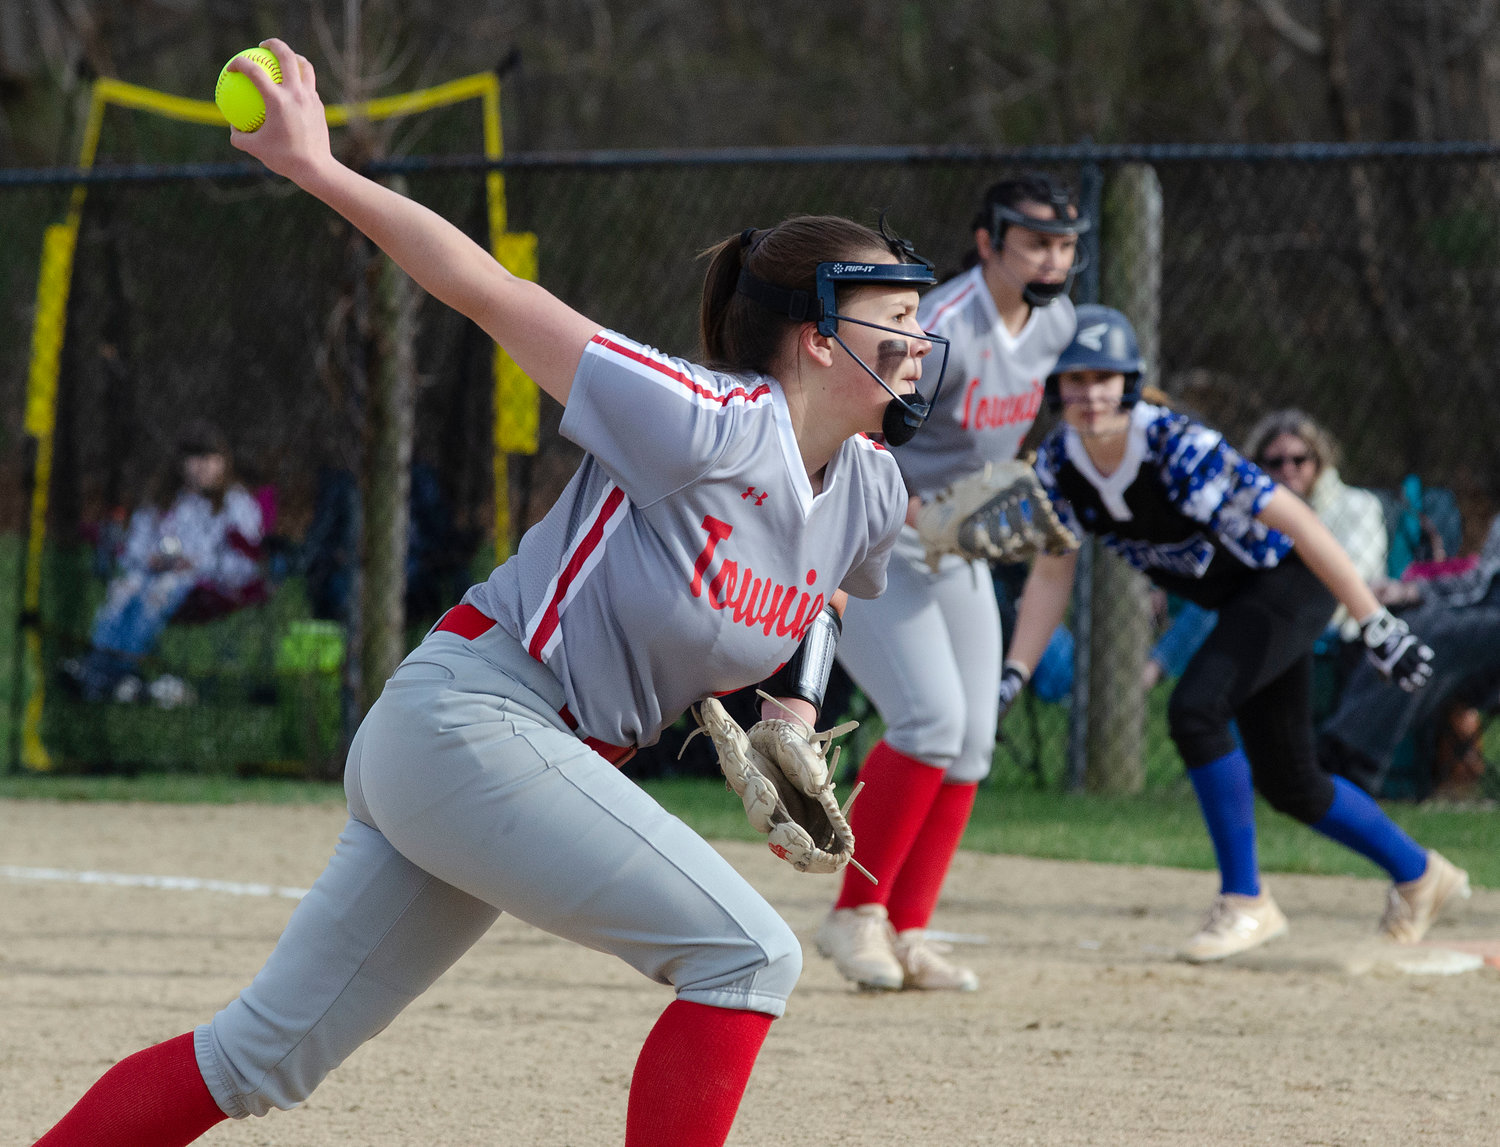 Pitcher Keira Quadros winds up to pitch during the team's game against Scituate.